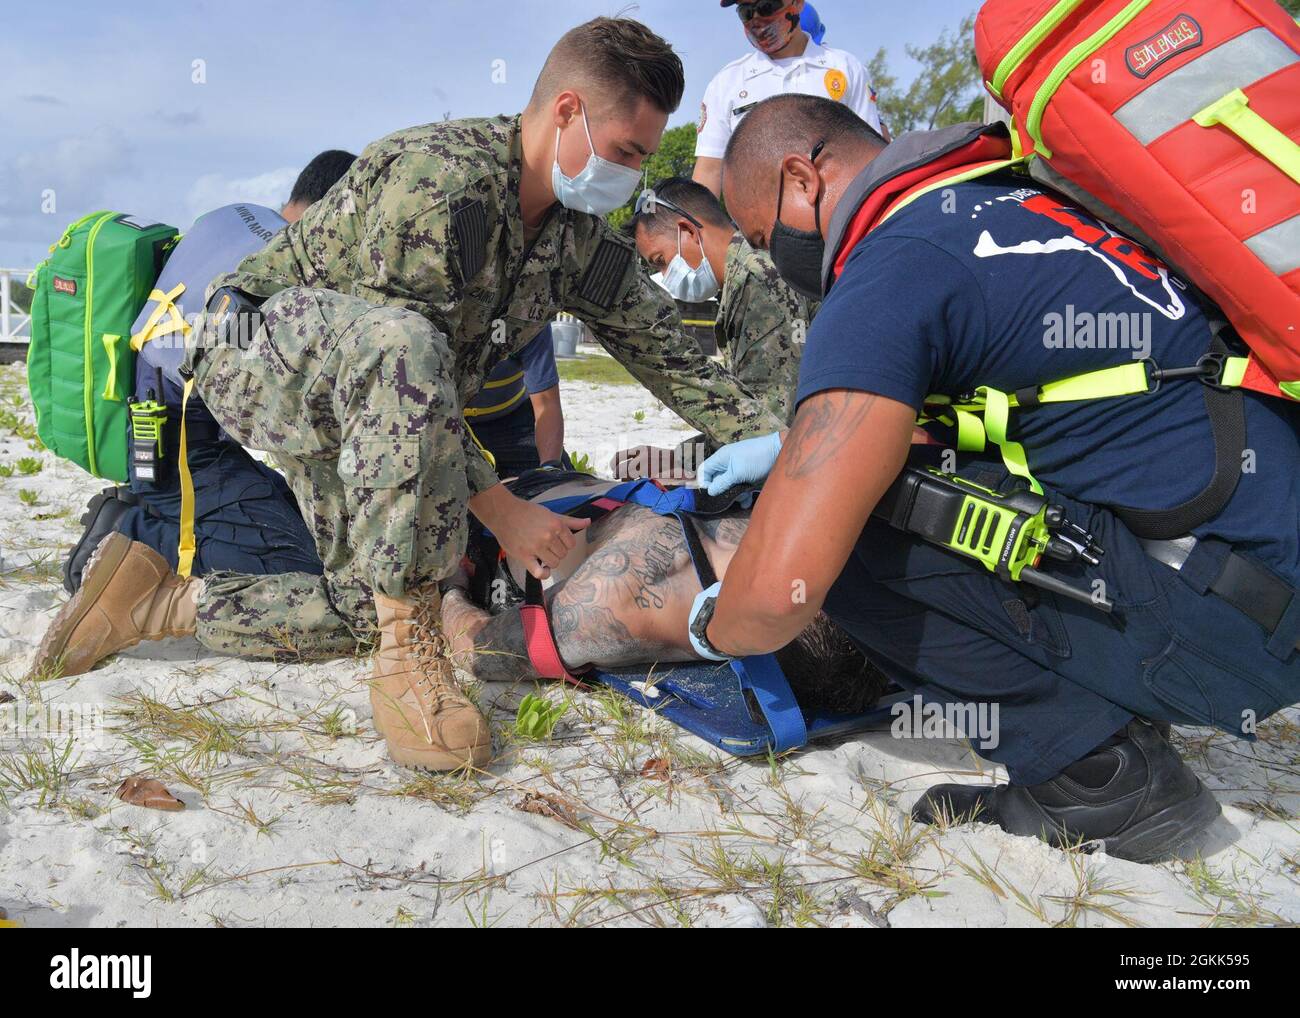 DIEGO GARCIA, British Indian Ocean Territory (May 12, 2021) – U.S. Navy Sailors along with first responders strap a wounded shark attack victim into a stretcher during a drill on Diego Garcia, May 12, 2021. U.S. Navy Support Facility Diego Garcia provides logistic, service, recreational and administrative support to U.S. and allied forces forward deployed to the Indian Ocean and Arabian Gulf. Stock Photo